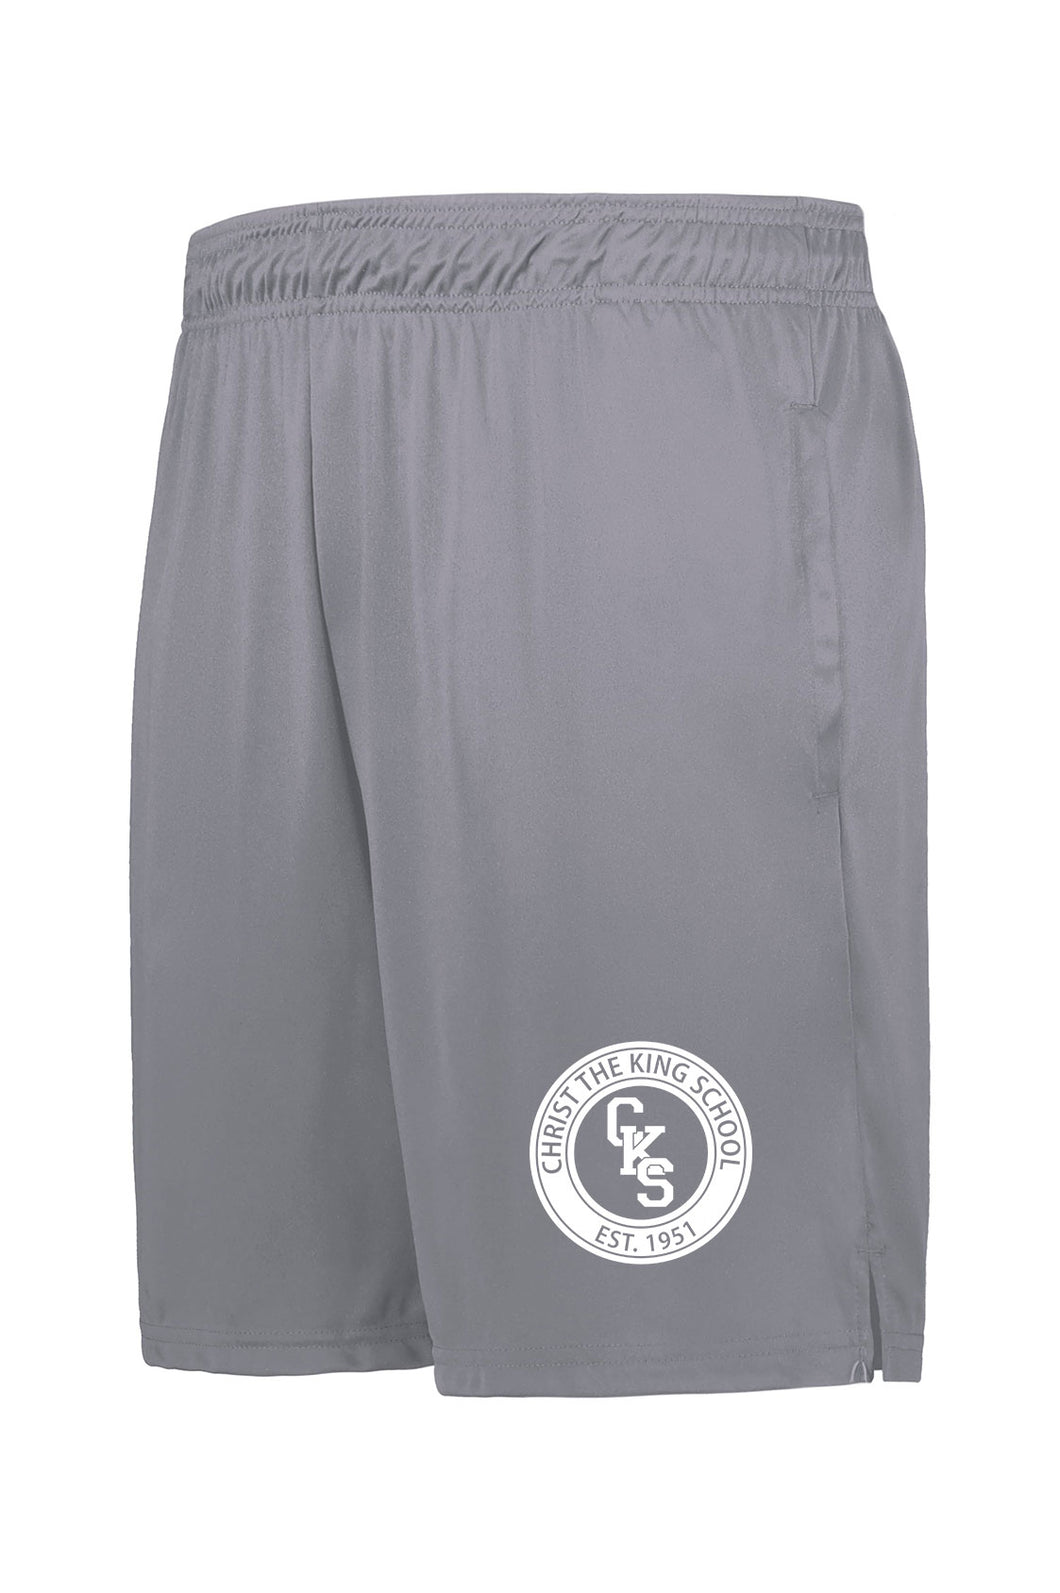 Holloway Youth Momentum Shorts  $26.50 2 COLORS